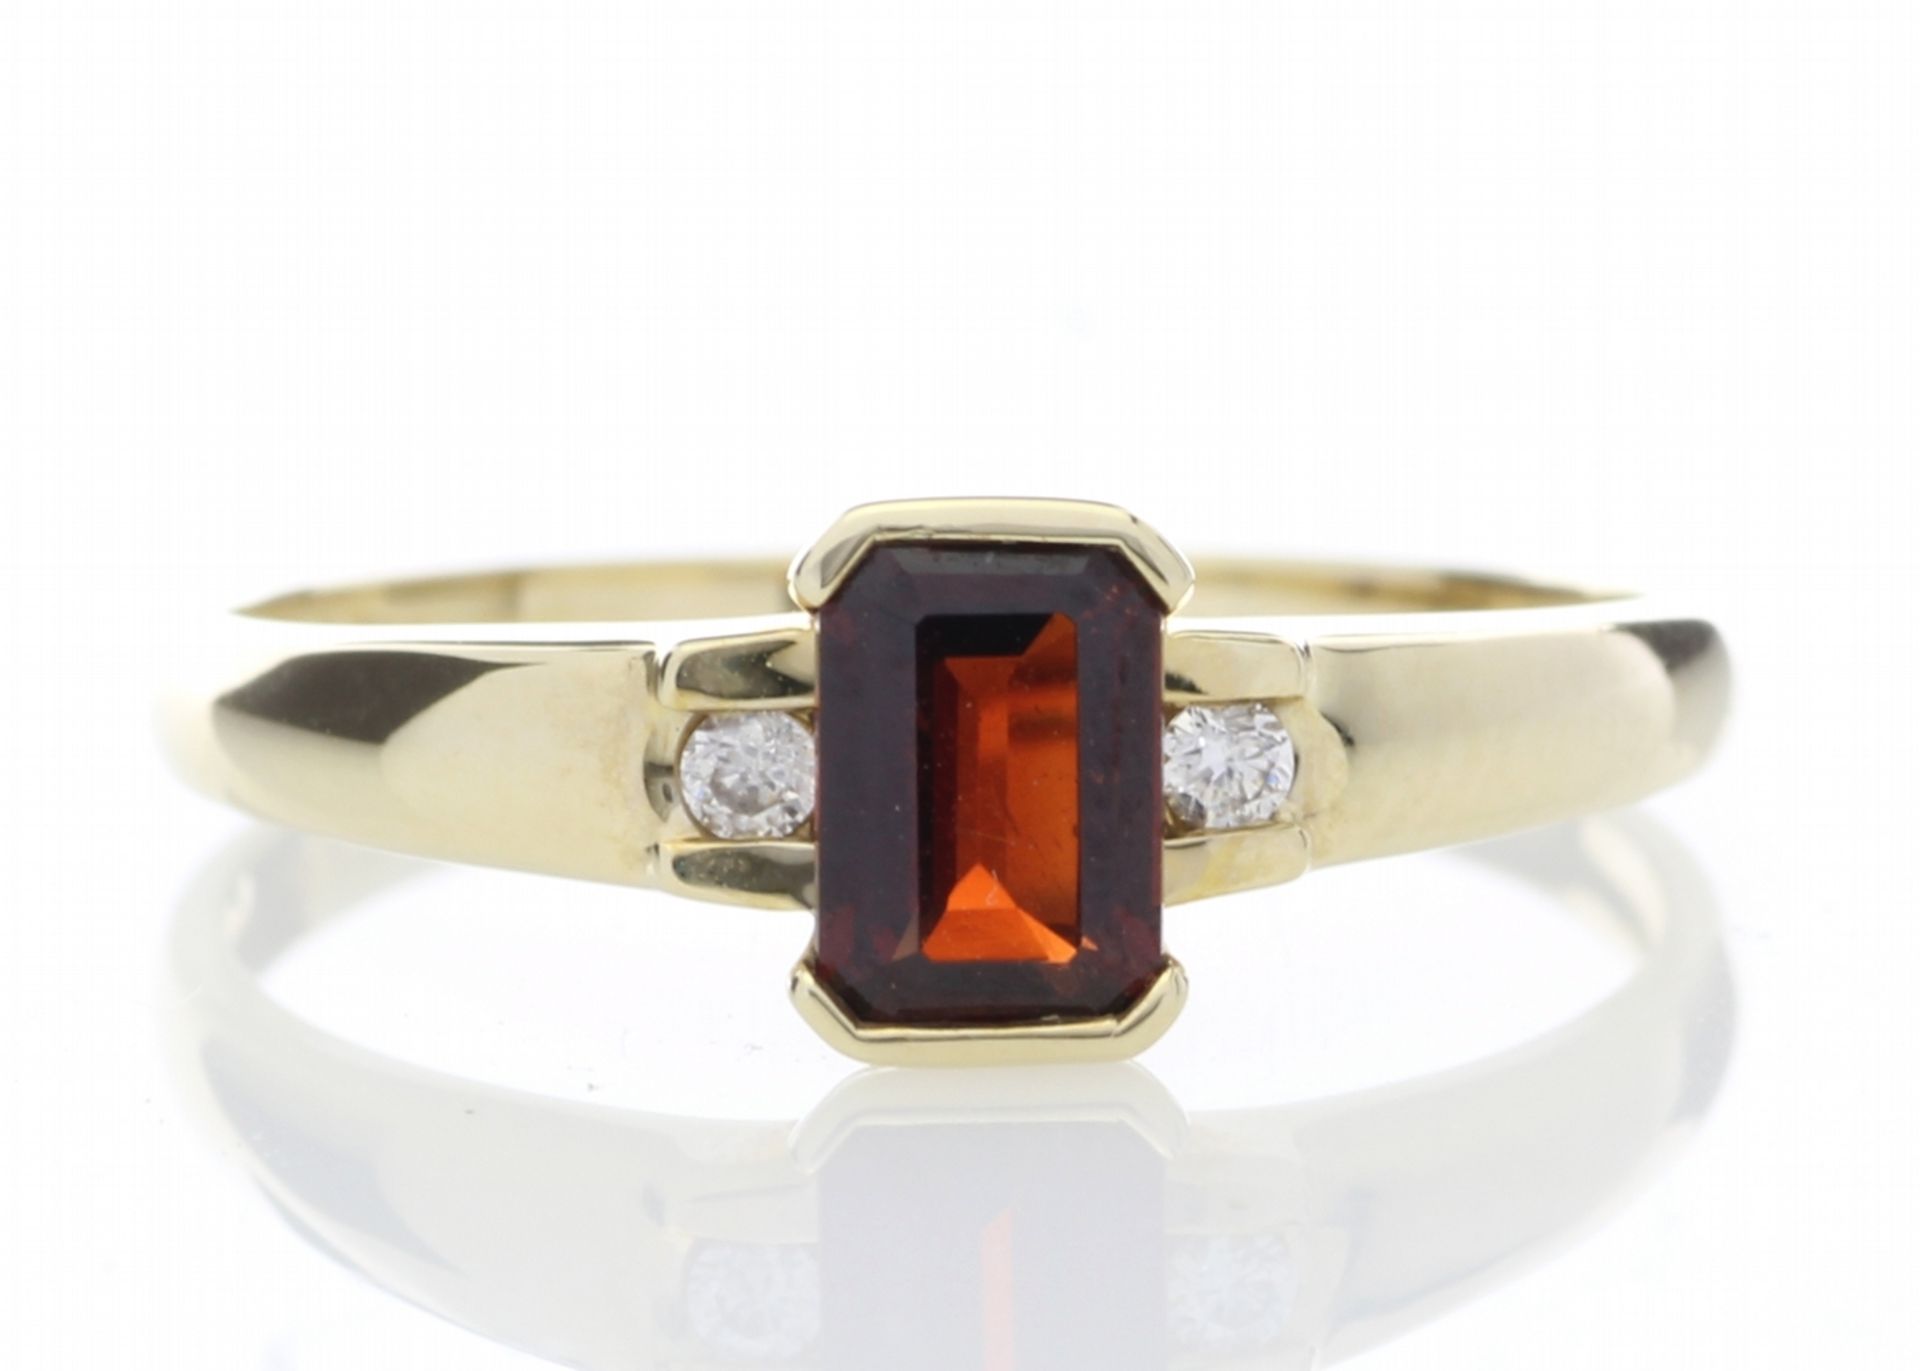 9ct Yellow Gold Emerald Cut Garnet Diamond Ring 0.05 Carats - Valued by GIE £1,445.00 - 9ct Yellow